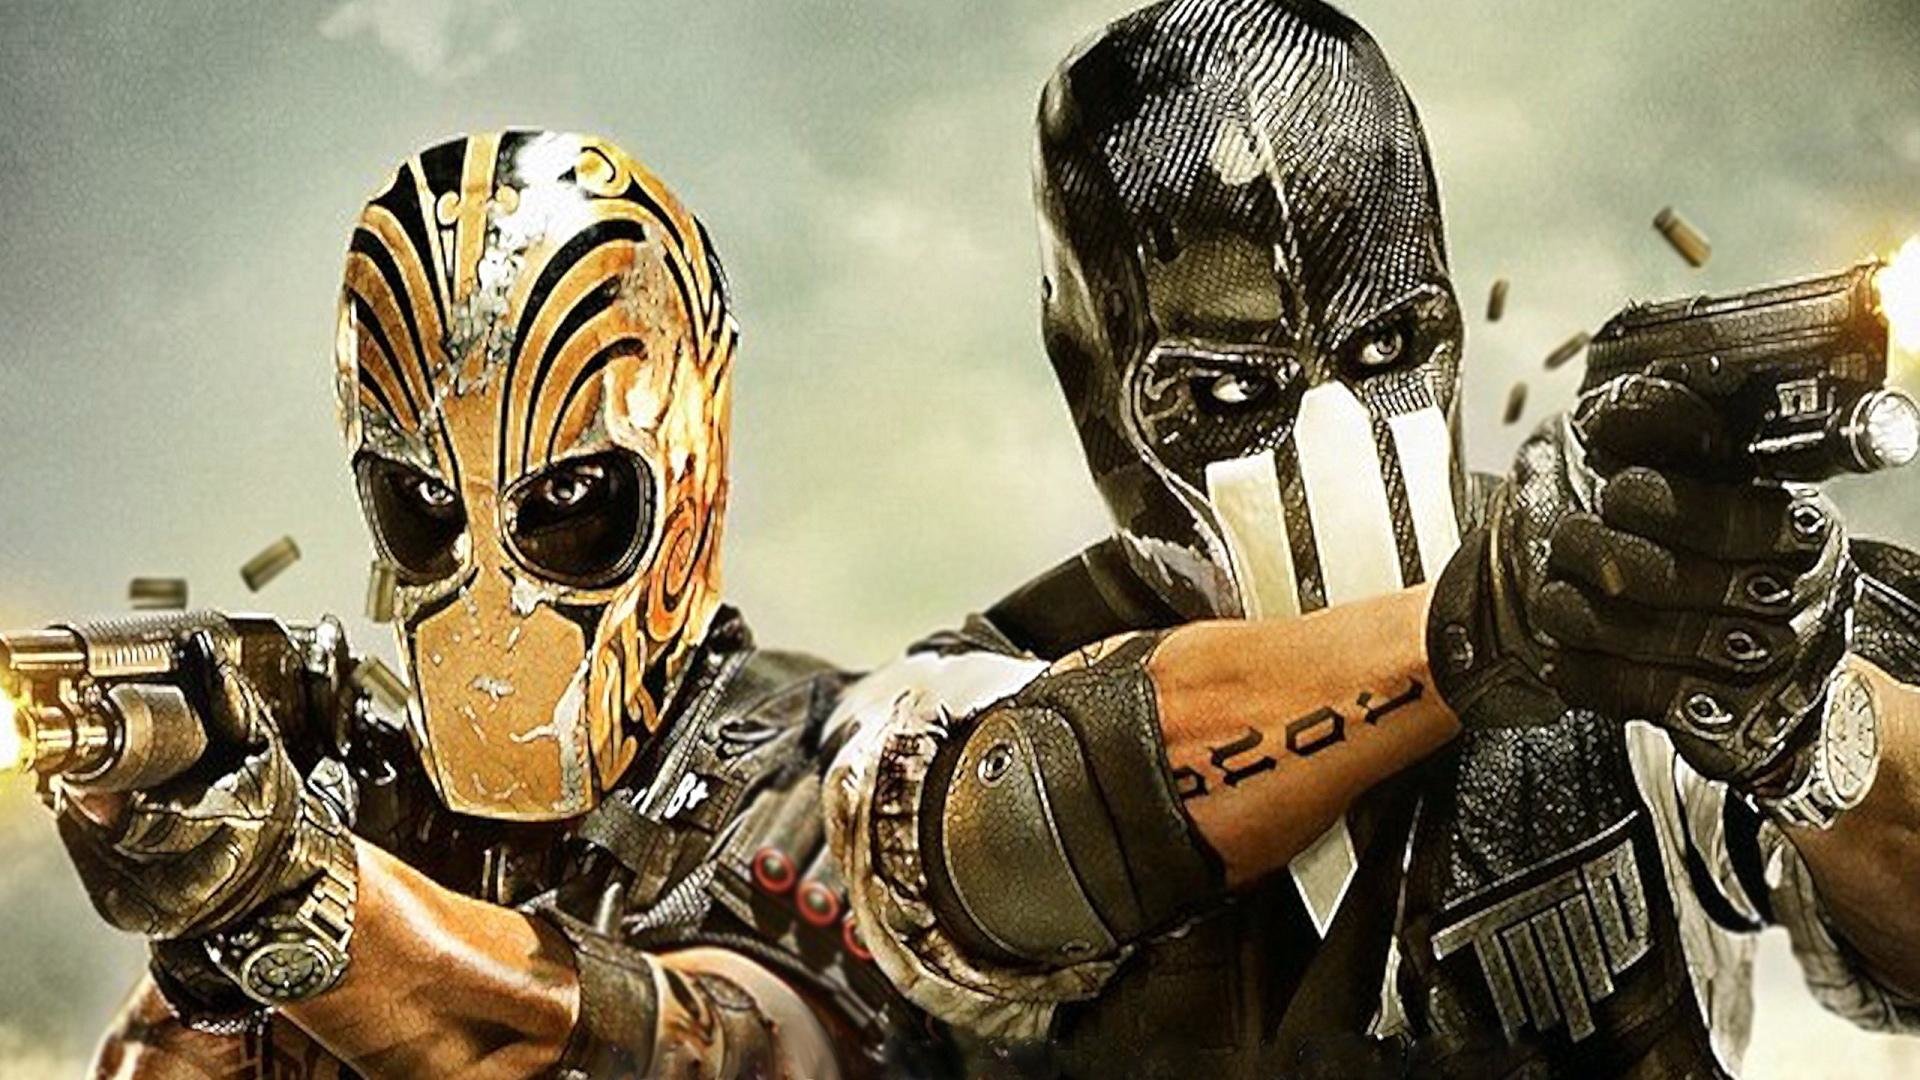 Army Of Two Wallpapers 1920x1080 Full Hd 1080p Desktop Backgrounds Images, Photos, Reviews